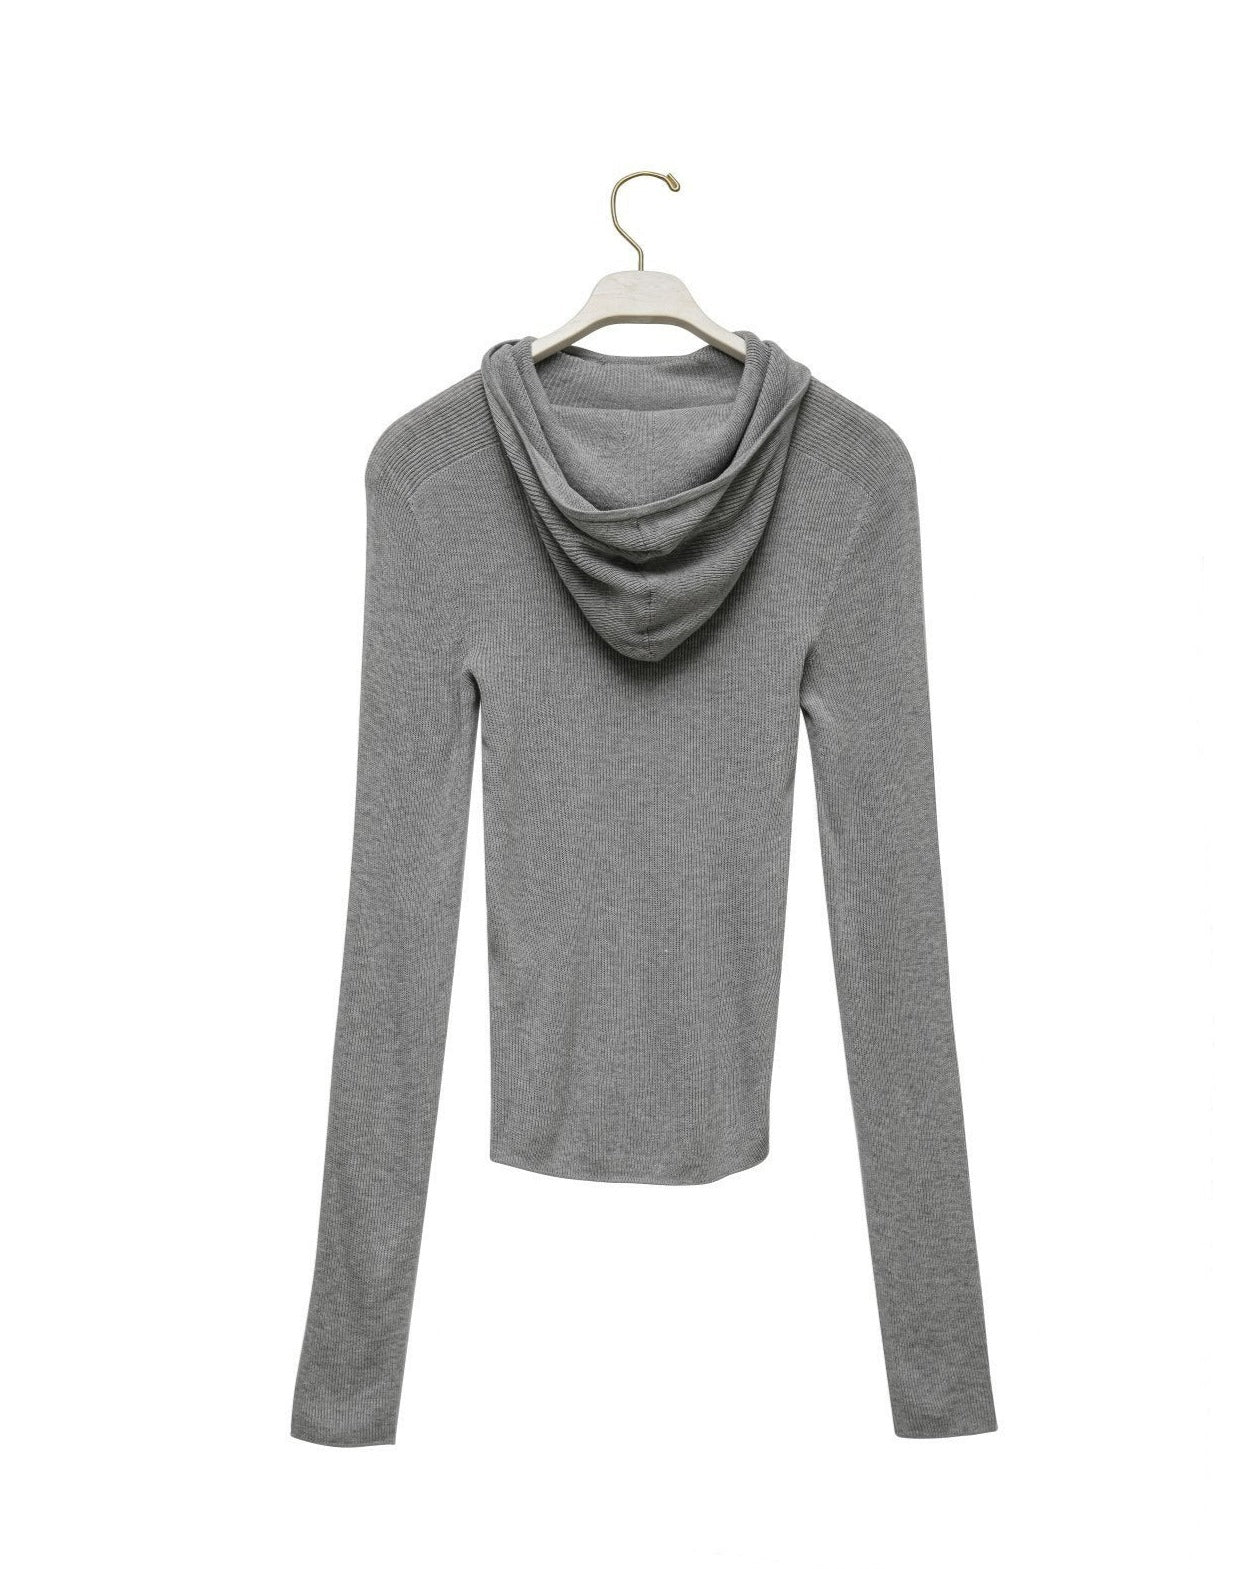 PAPERMOON ペーパームーン】AW / Whole Garment Hooded Knit Top ...